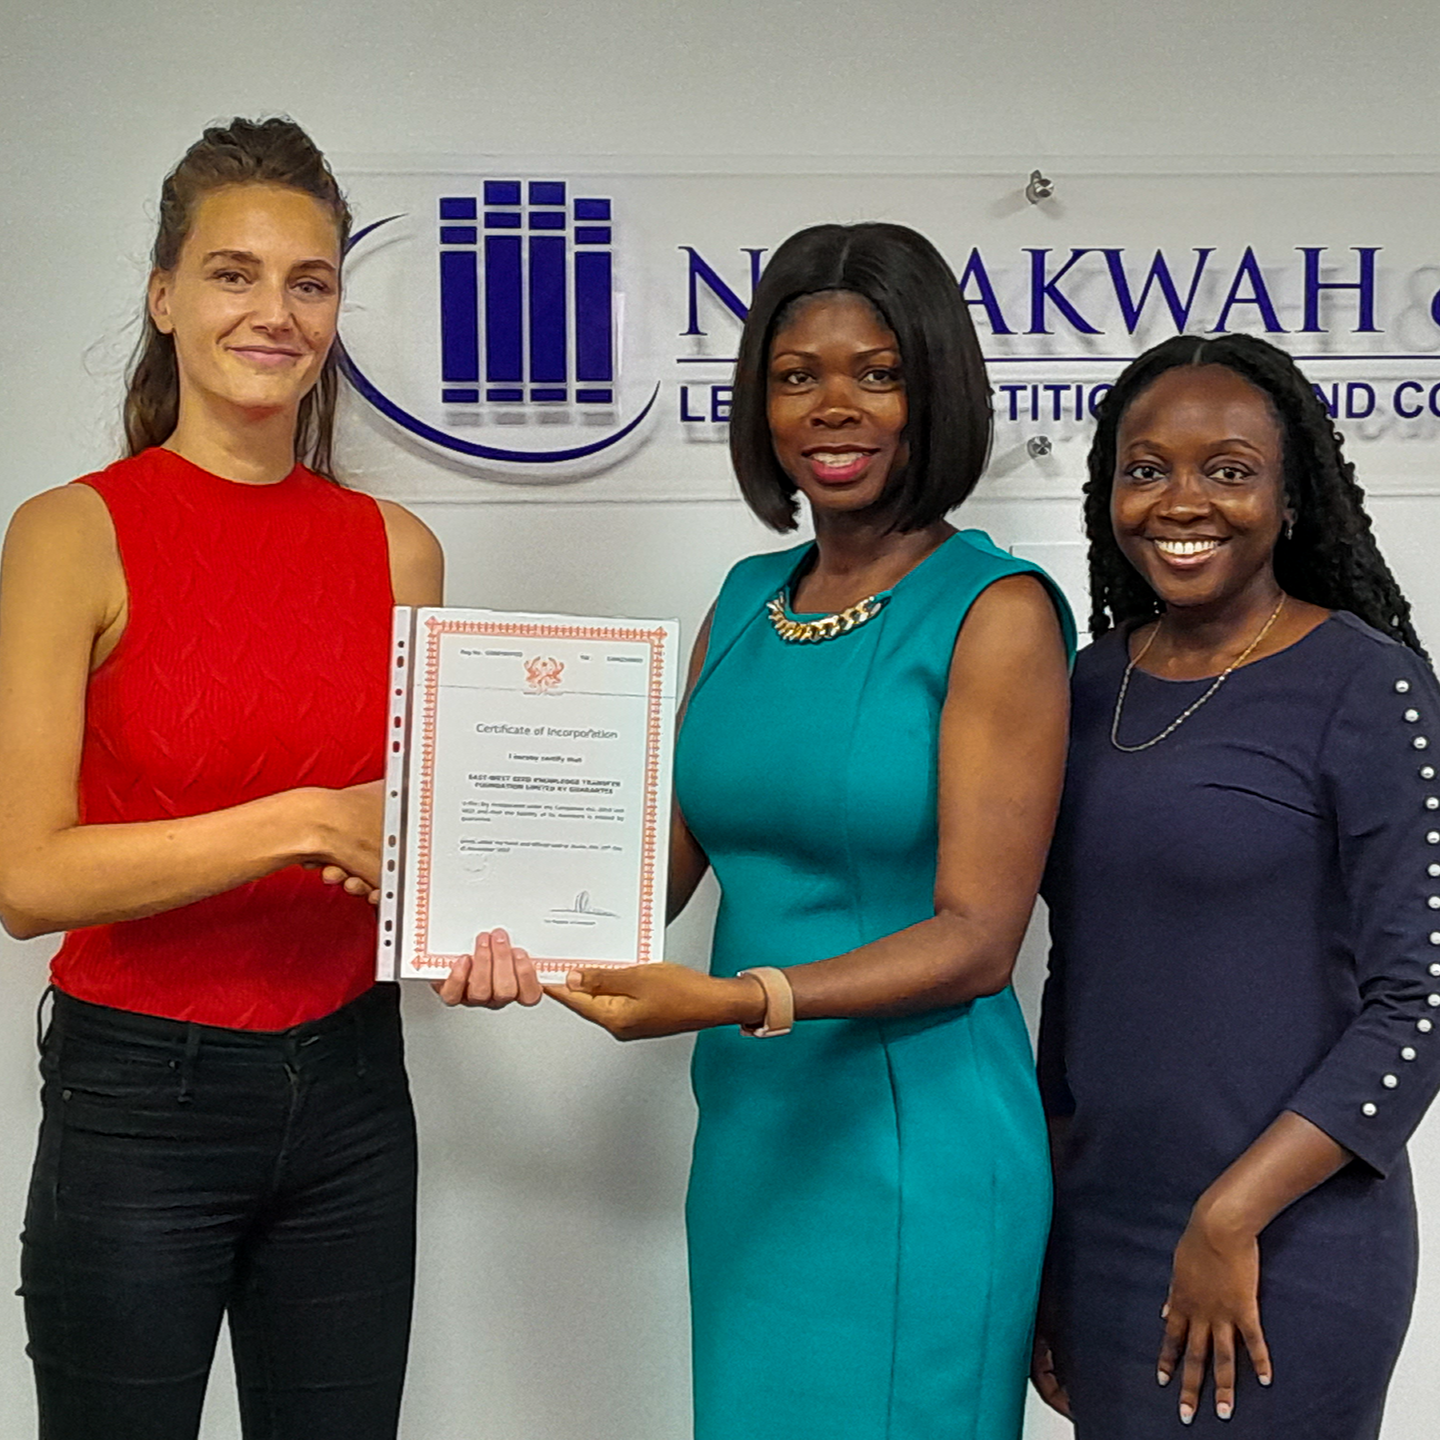 EWS-KT Program Manager Femke de Jong receives the registration document from Abena Ntrakwah-Mensah and Courtney Heather Awotwi of Accra law firm Ntrakwah & Co.